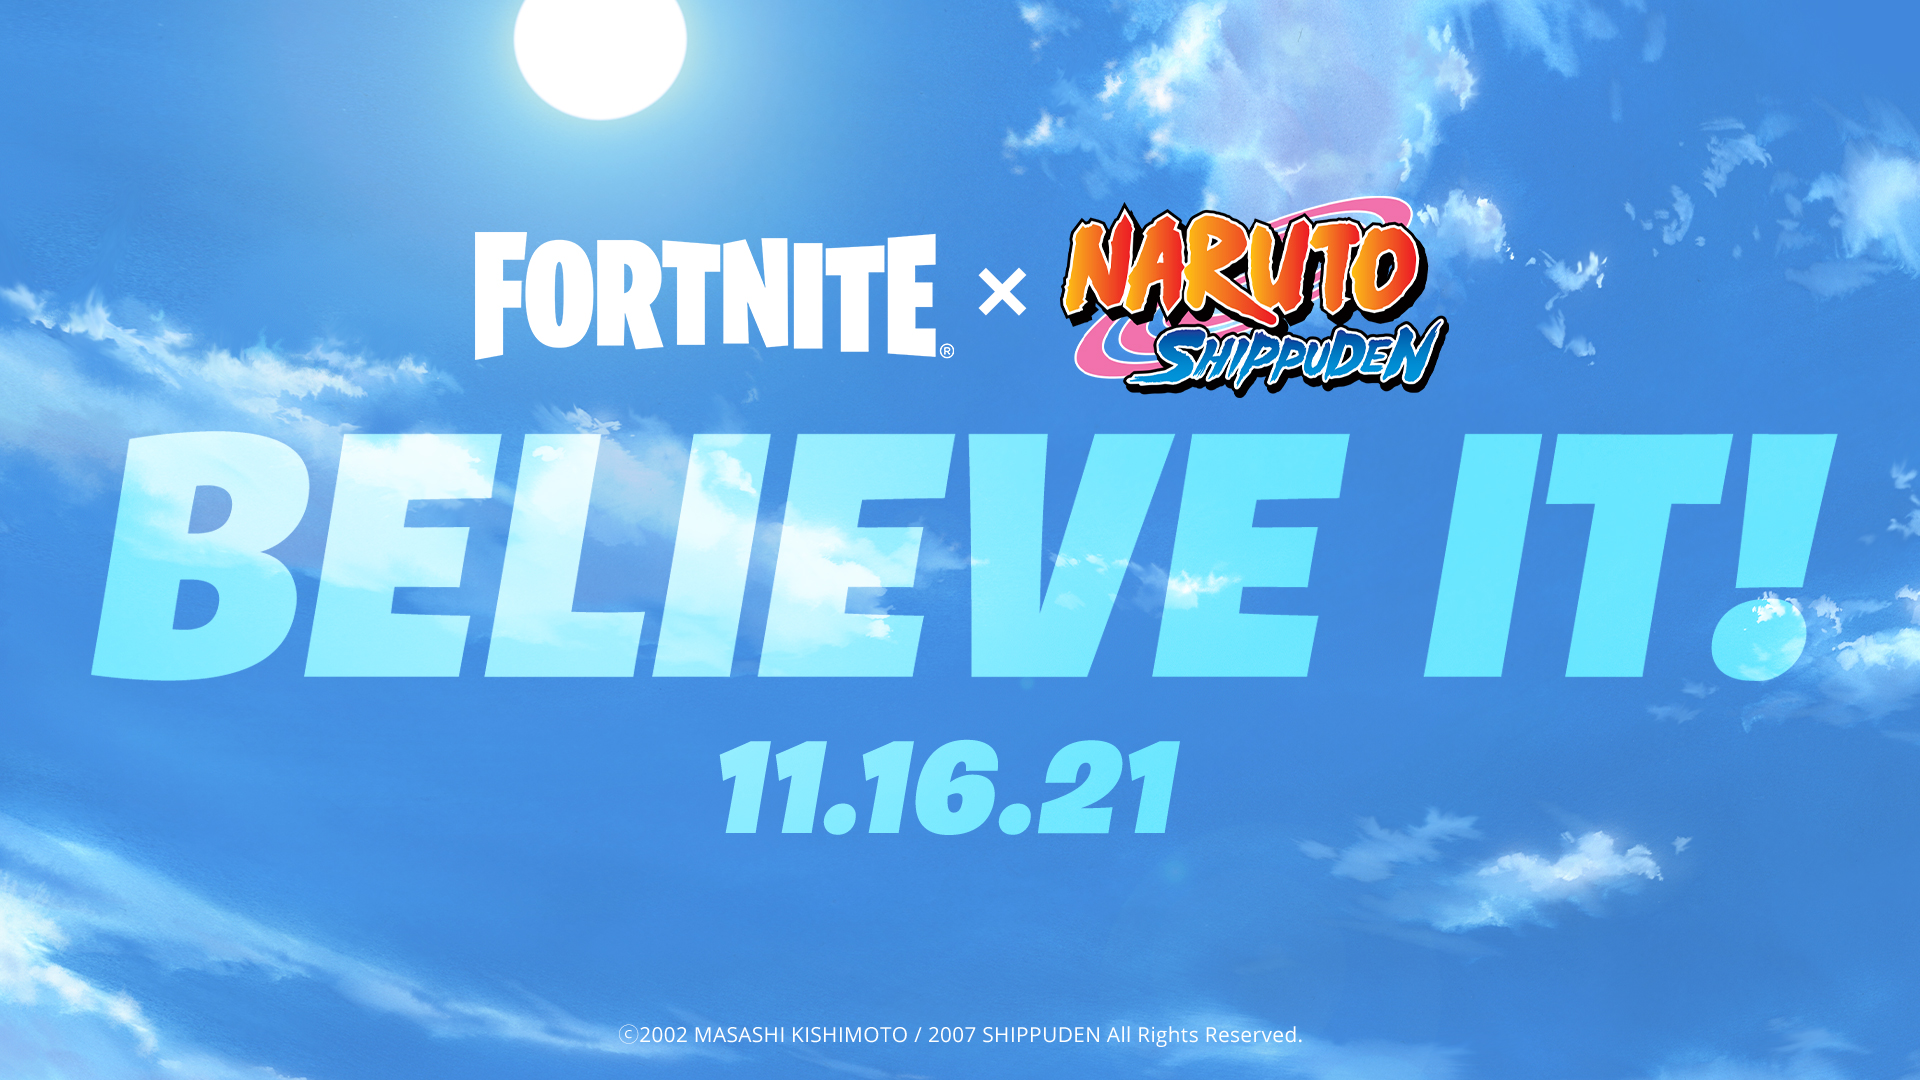 Believe it! appears in white text under a Fortnite x Naruto sign